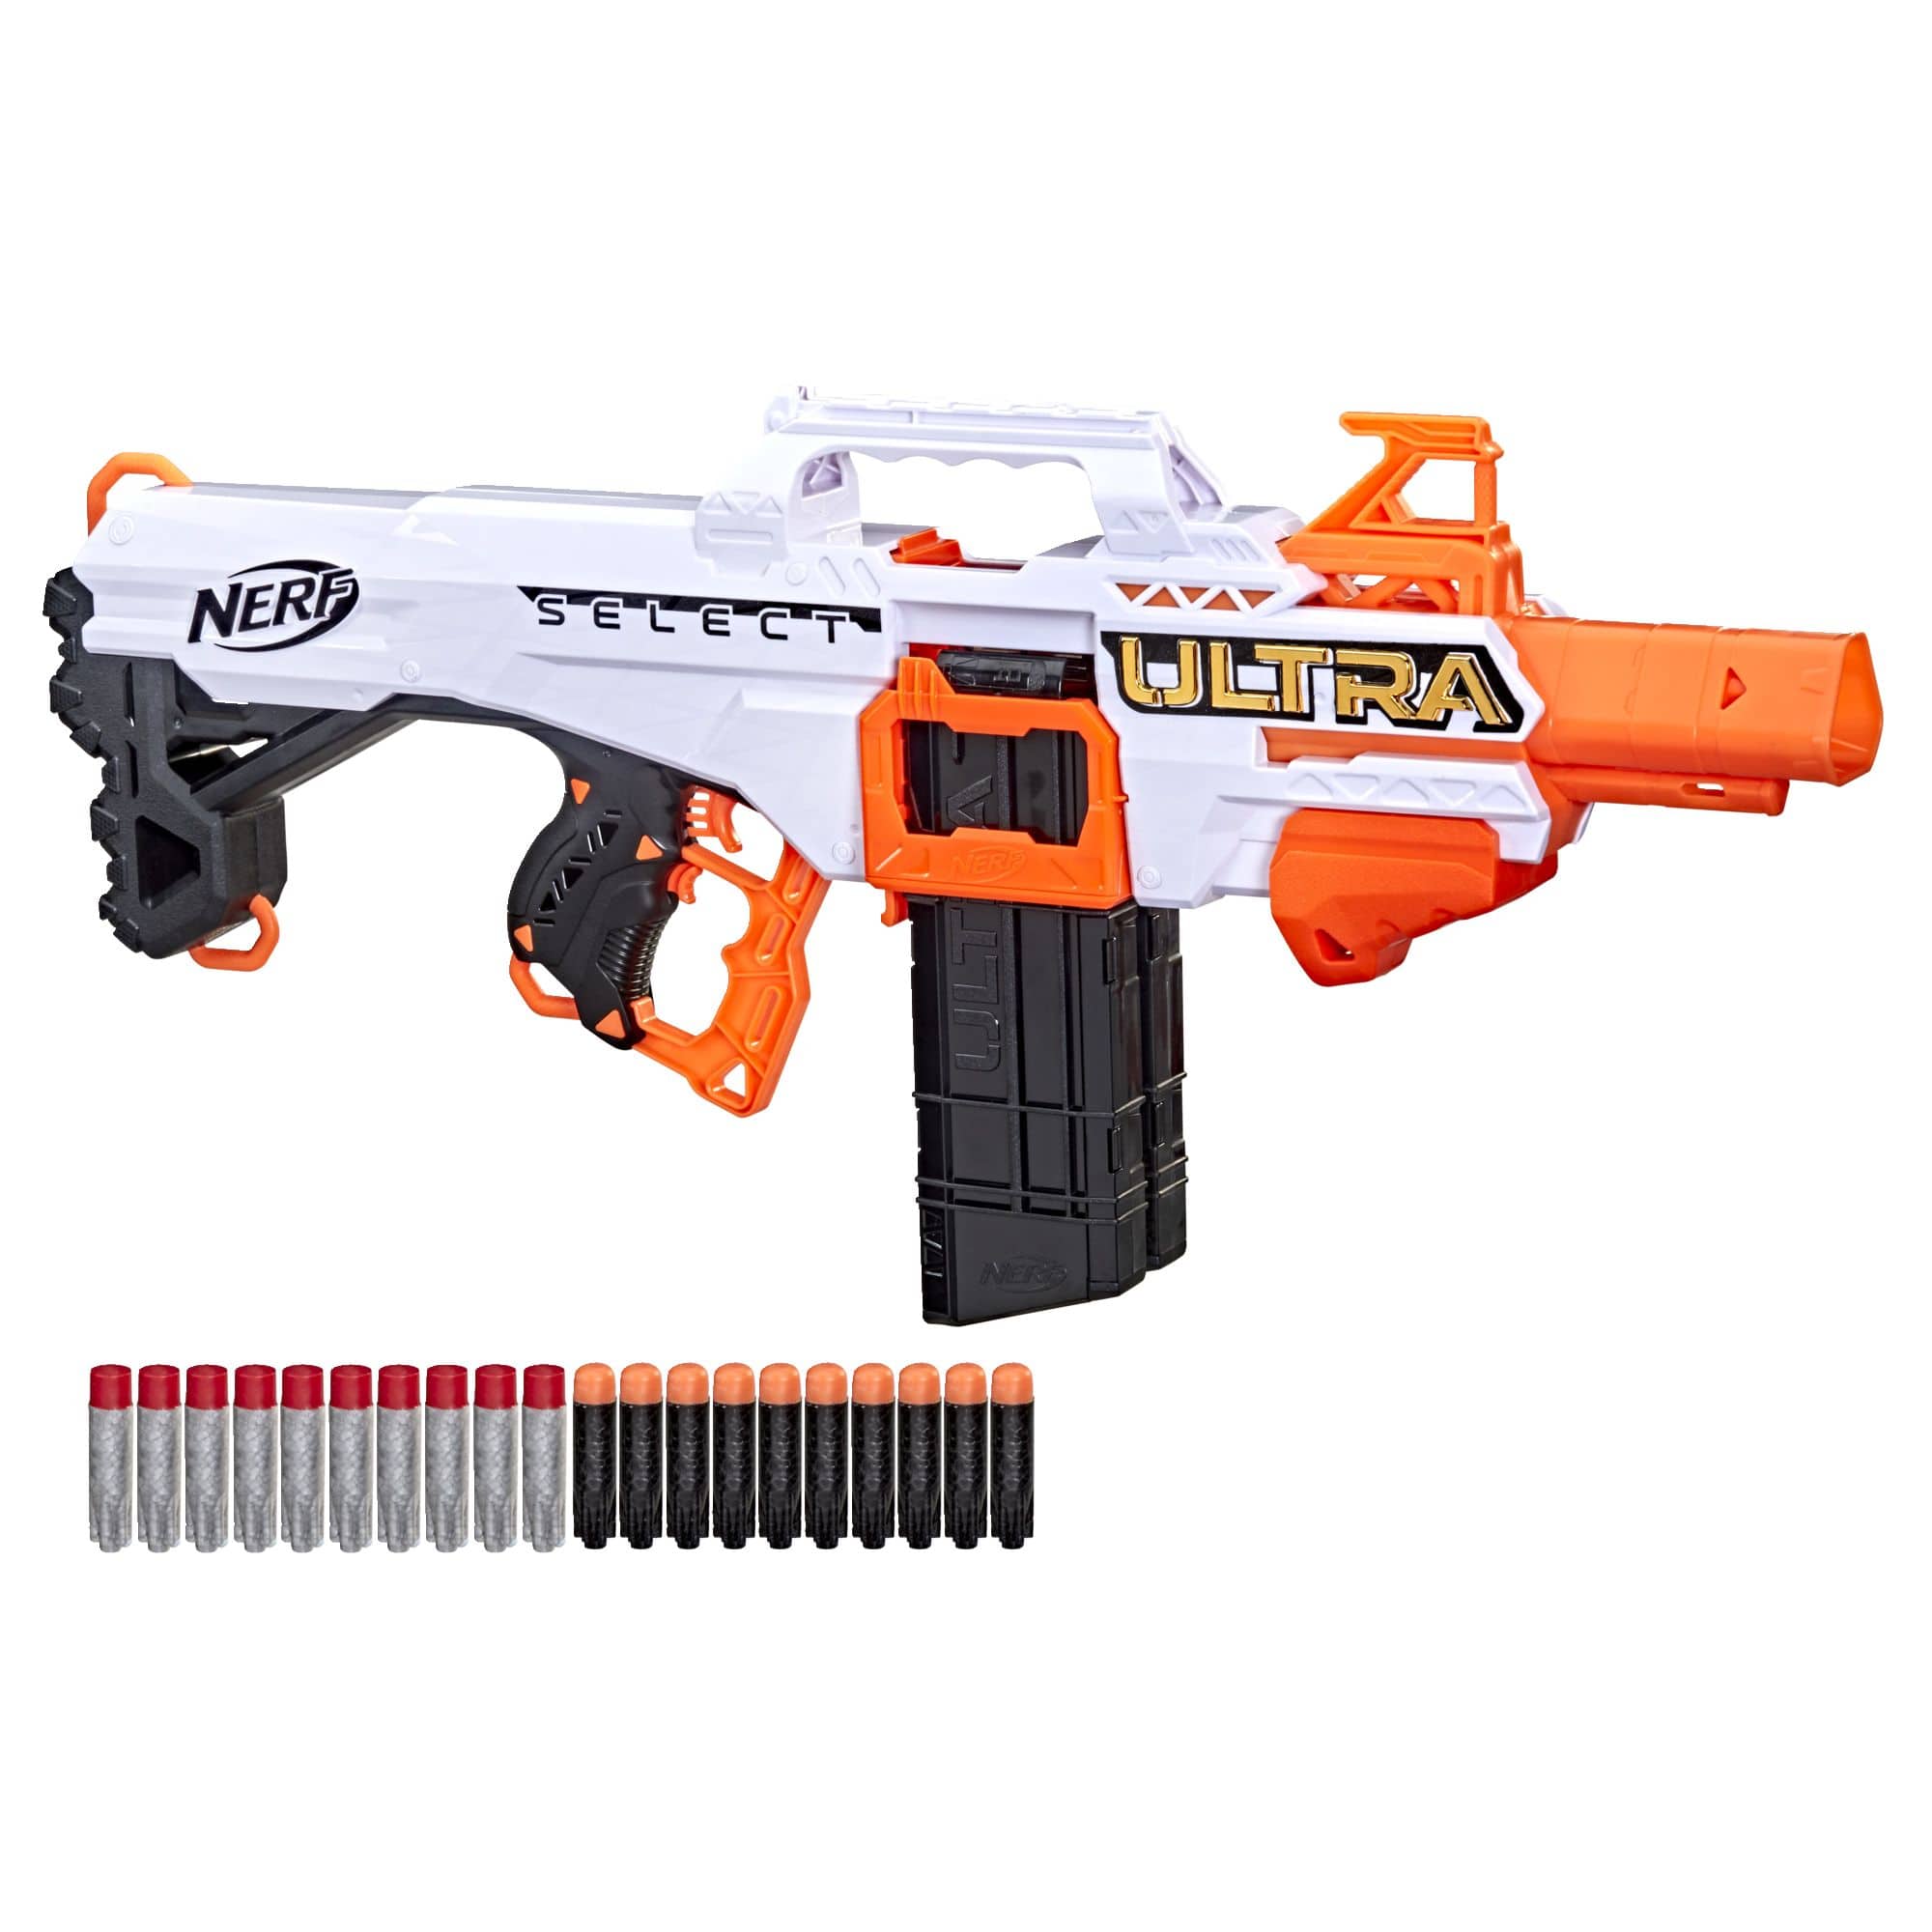 NERF Ultra Select Fully Motorized Age | Canadian Tire